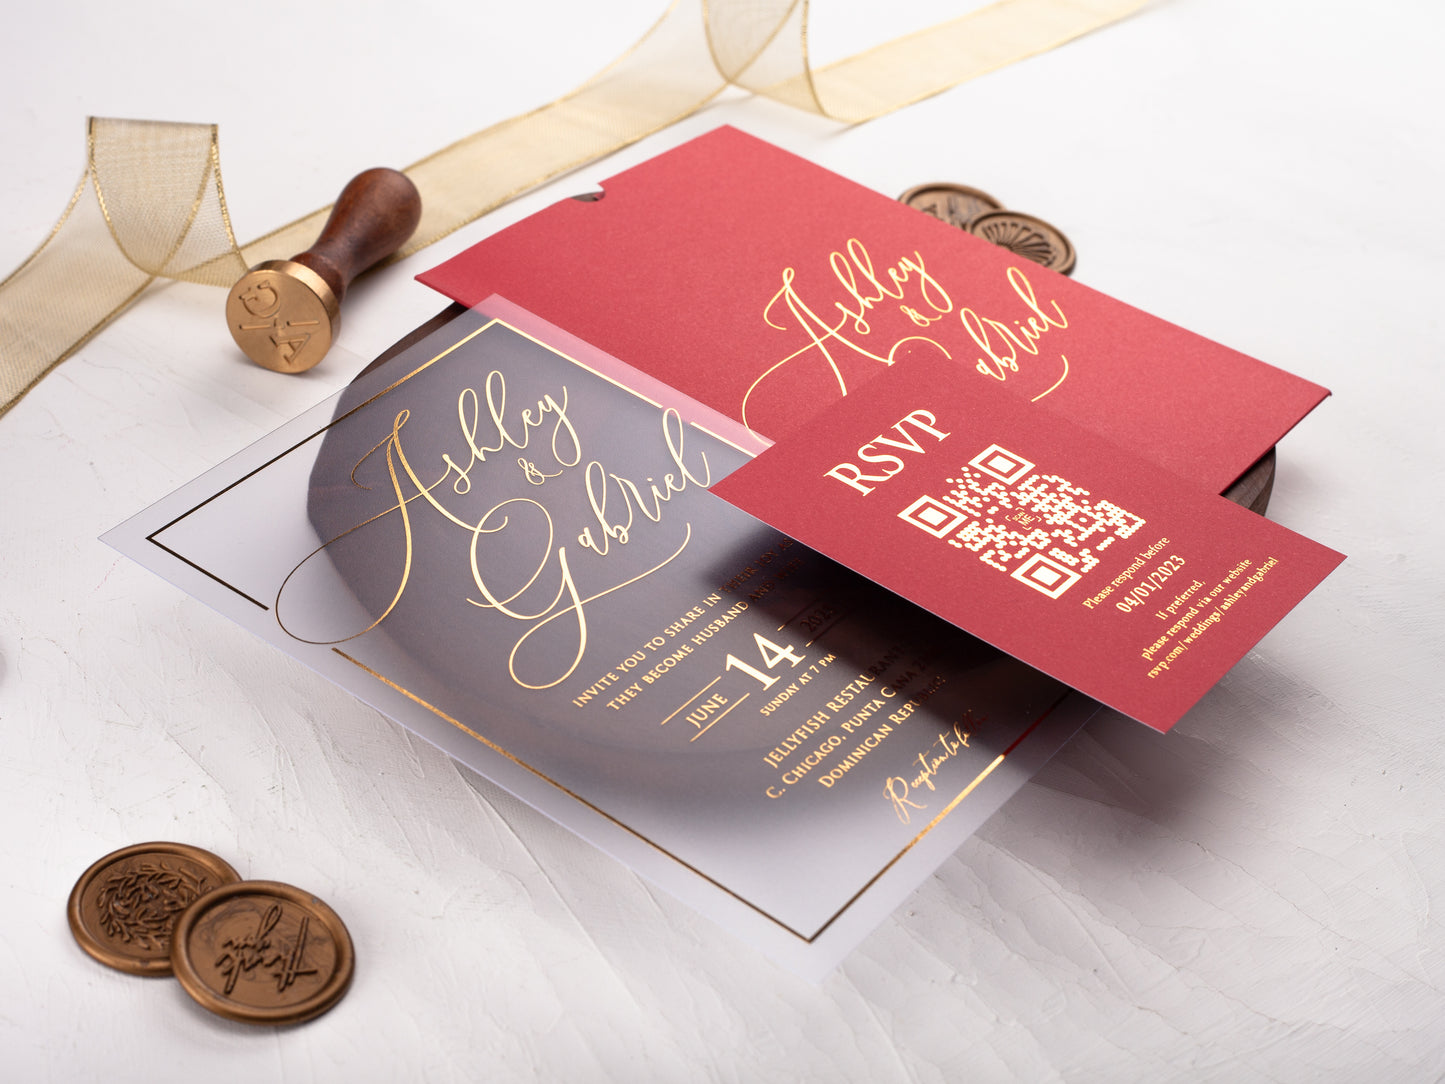 Acrylic Wedding Invitation with Red Envelope and Gold Foil Print